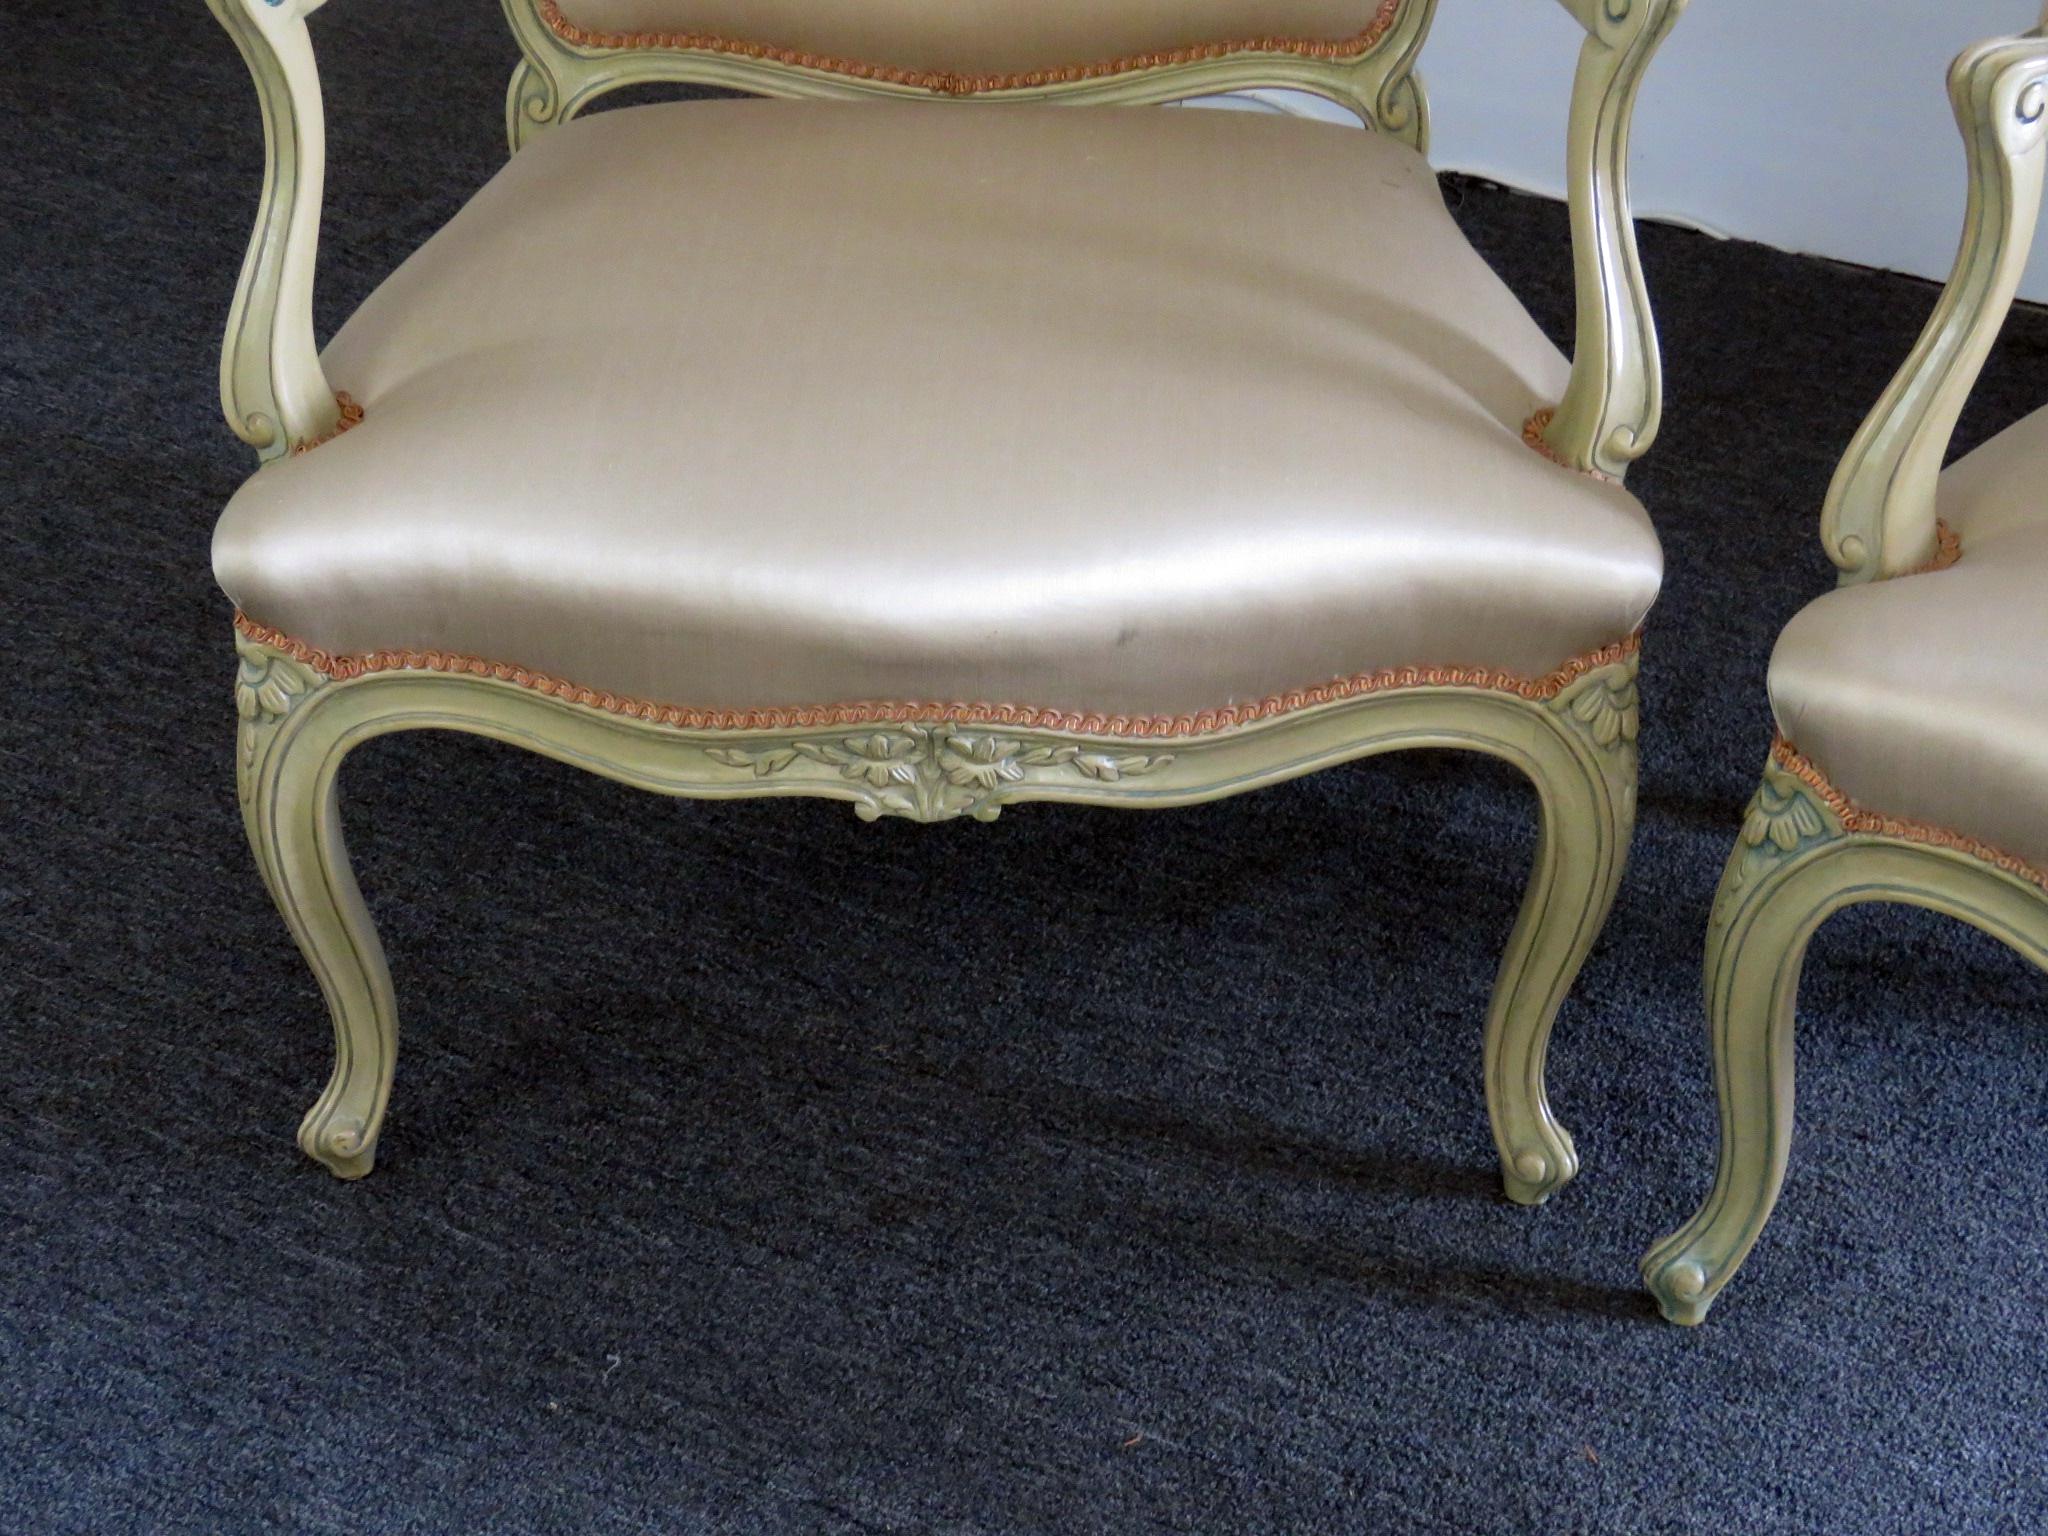 Pair of Yale R Burge Louis XVI style distressed painted fauteuils.